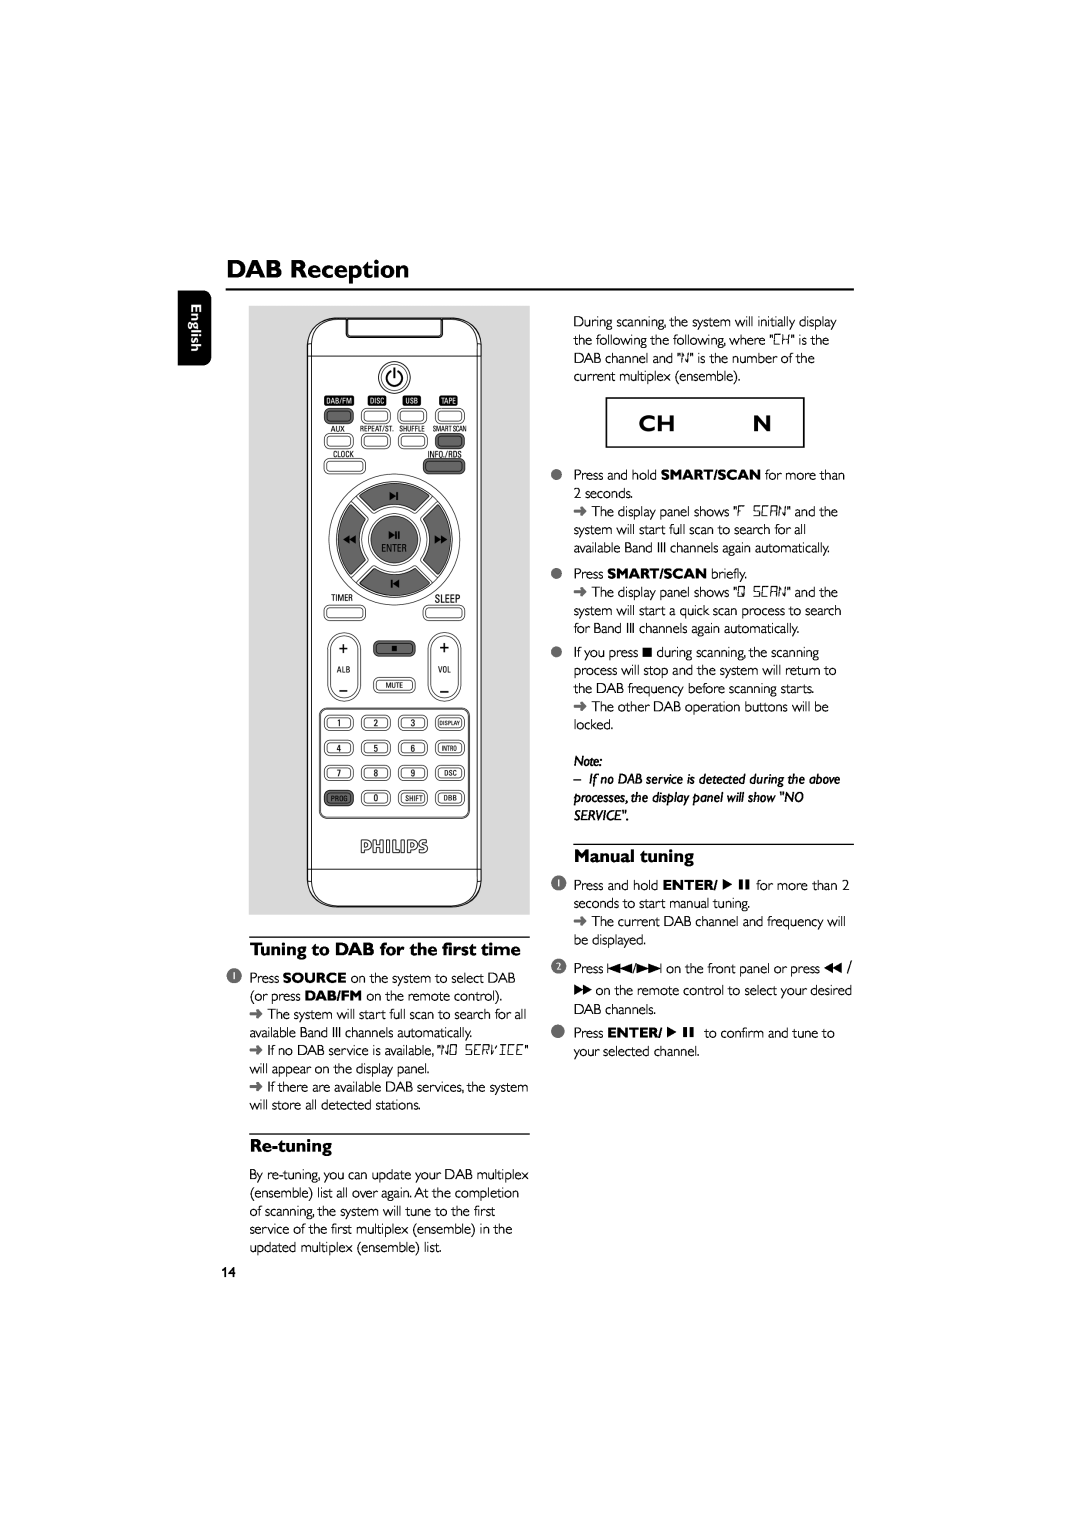 Philips MCB204 user manual DAB Reception, Tuning to DAB for the first time, Re-tuning, Manual tuning, Ch N, English 